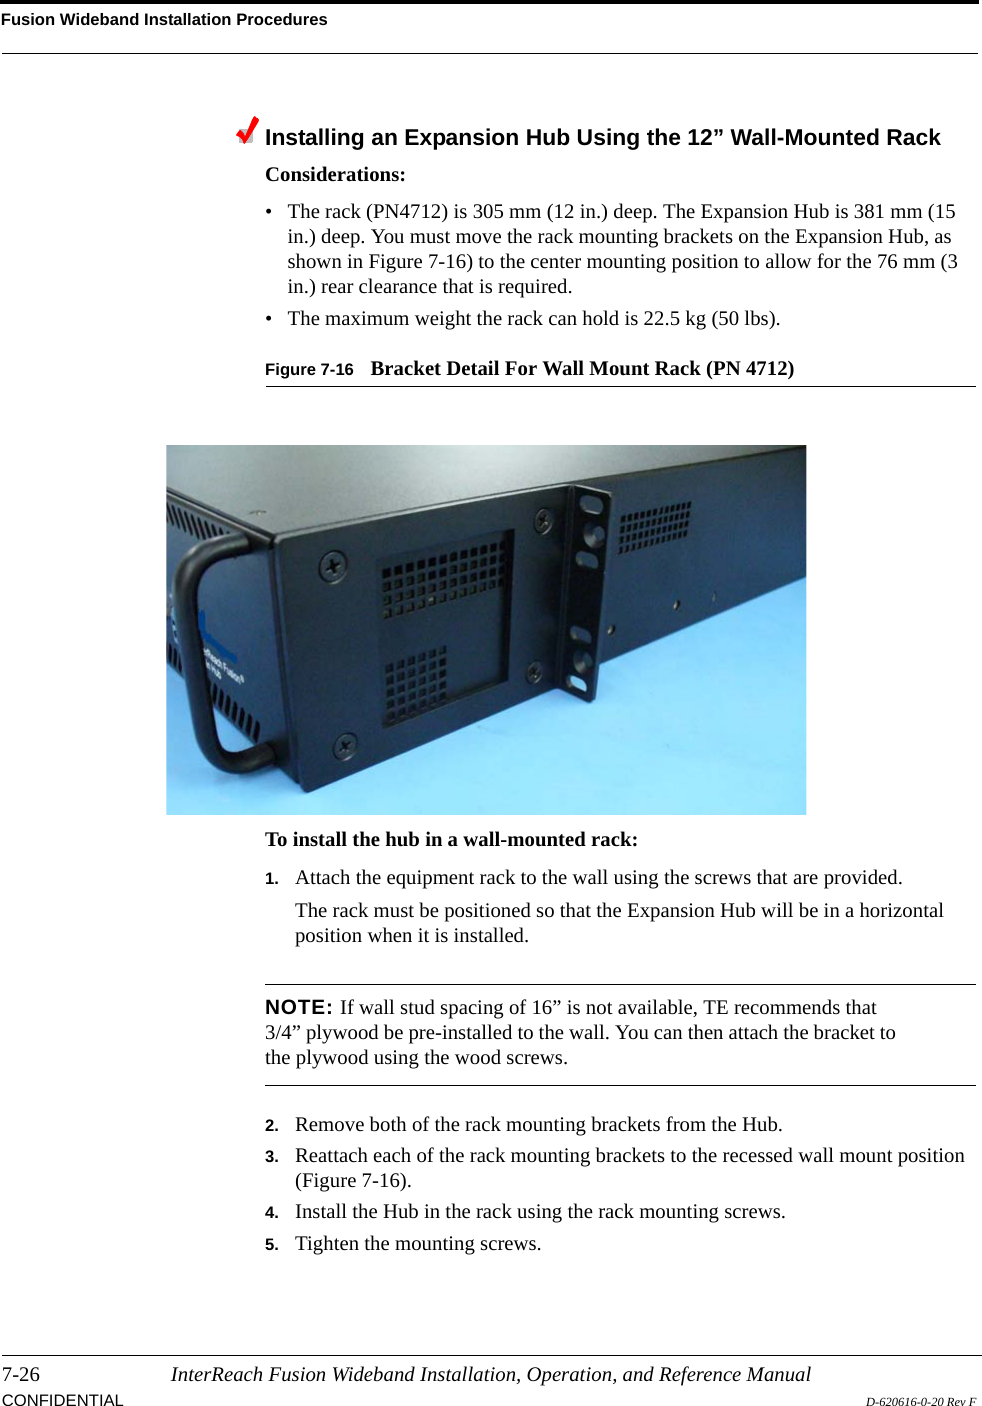 Fusion Wideband Installation Procedures7-26 InterReach Fusion Wideband Installation, Operation, and Reference ManualCONFIDENTIAL D-620616-0-20 Rev FInstalling an Expansion Hub Using the 12” Wall-Mounted RackConsiderations:• The rack (PN4712) is 305 mm (12 in.) deep. The Expansion Hub is 381 mm (15 in.) deep. You must move the rack mounting brackets on the Expansion Hub, as shown in Figure 7-16) to the center mounting position to allow for the 76 mm (3 in.) rear clearance that is required.• The maximum weight the rack can hold is 22.5 kg (50 lbs).Figure 7-16 Bracket Detail For Wall Mount Rack (PN 4712)To install the hub in a wall-mounted rack:1. Attach the equipment rack to the wall using the screws that are provided.The rack must be positioned so that the Expansion Hub will be in a horizontal position when it is installed.NOTE: If wall stud spacing of 16” is not available, TE recommends that 3/4” plywood be pre-installed to the wall. You can then attach the bracket to the plywood using the wood screws.2. Remove both of the rack mounting brackets from the Hub.3. Reattach each of the rack mounting brackets to the recessed wall mount position (Figure 7-16).4. Install the Hub in the rack using the rack mounting screws.5. Tighten the mounting screws.